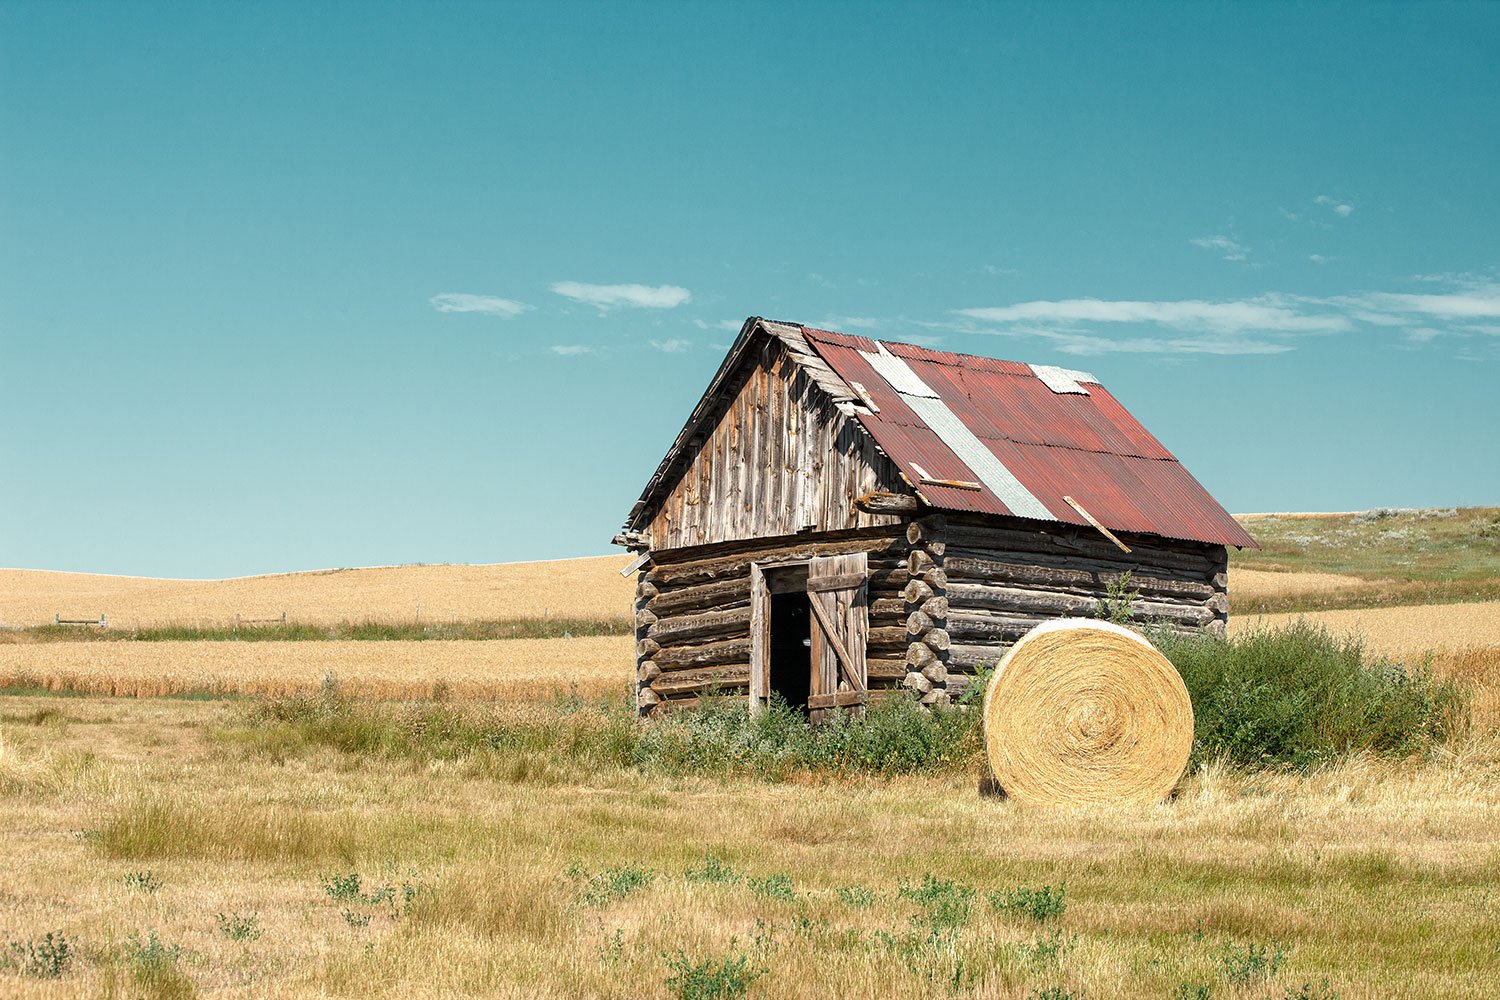  An old log shed on the quiet western plains outside of Winifred, Montana.   → Buy a Print   or   License Photo   